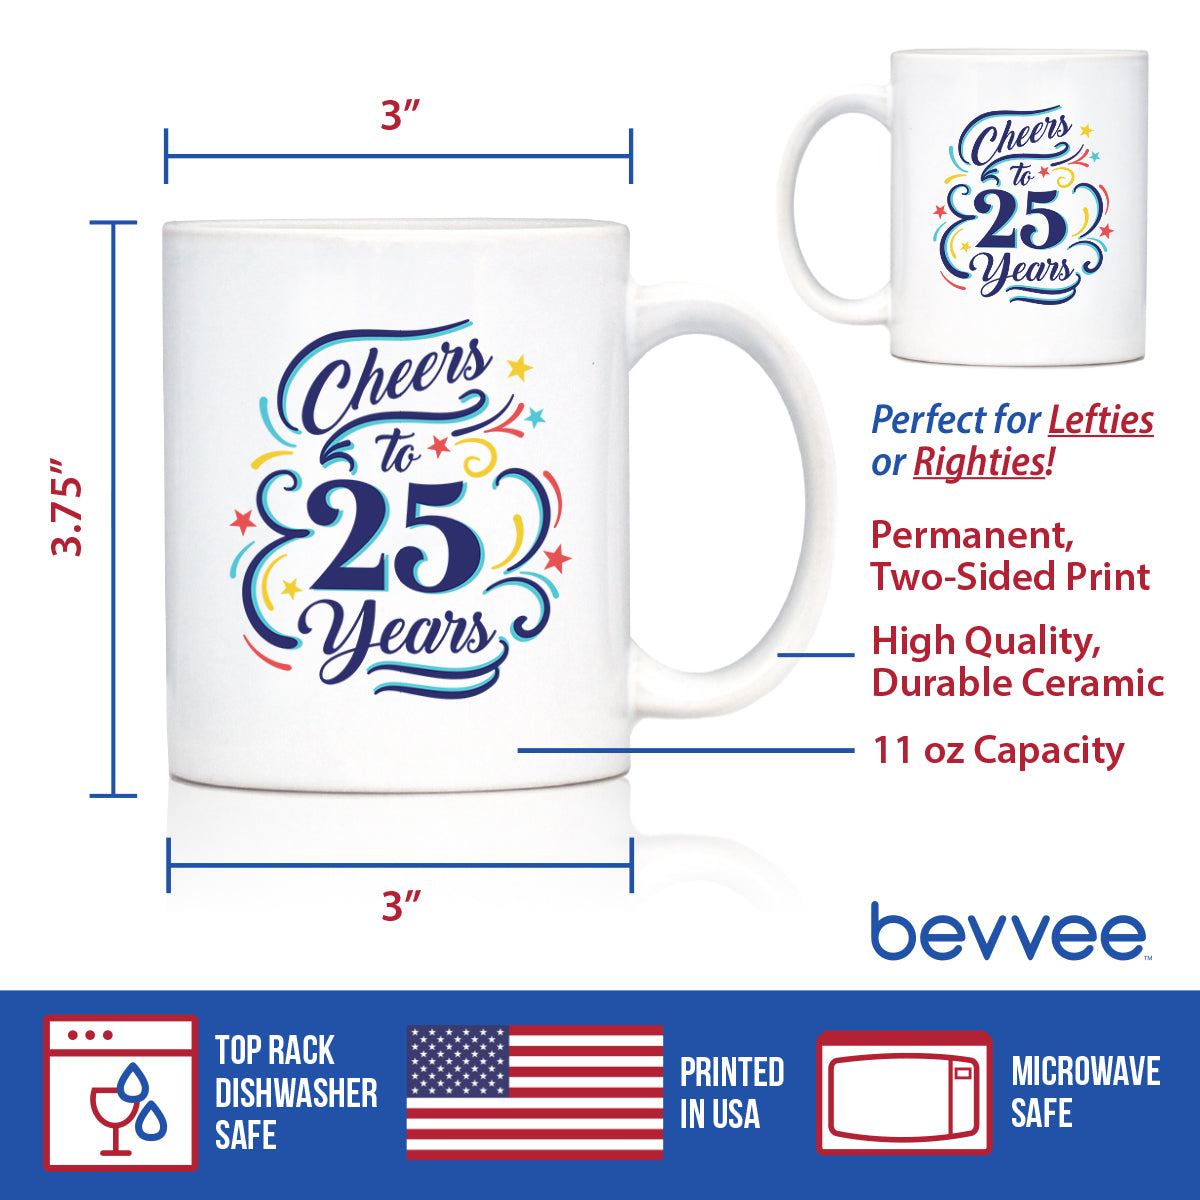 Cheers to 25 Years - Coffee Mug Gifts for Women &amp; Men - 25th Anniversary Party Decor